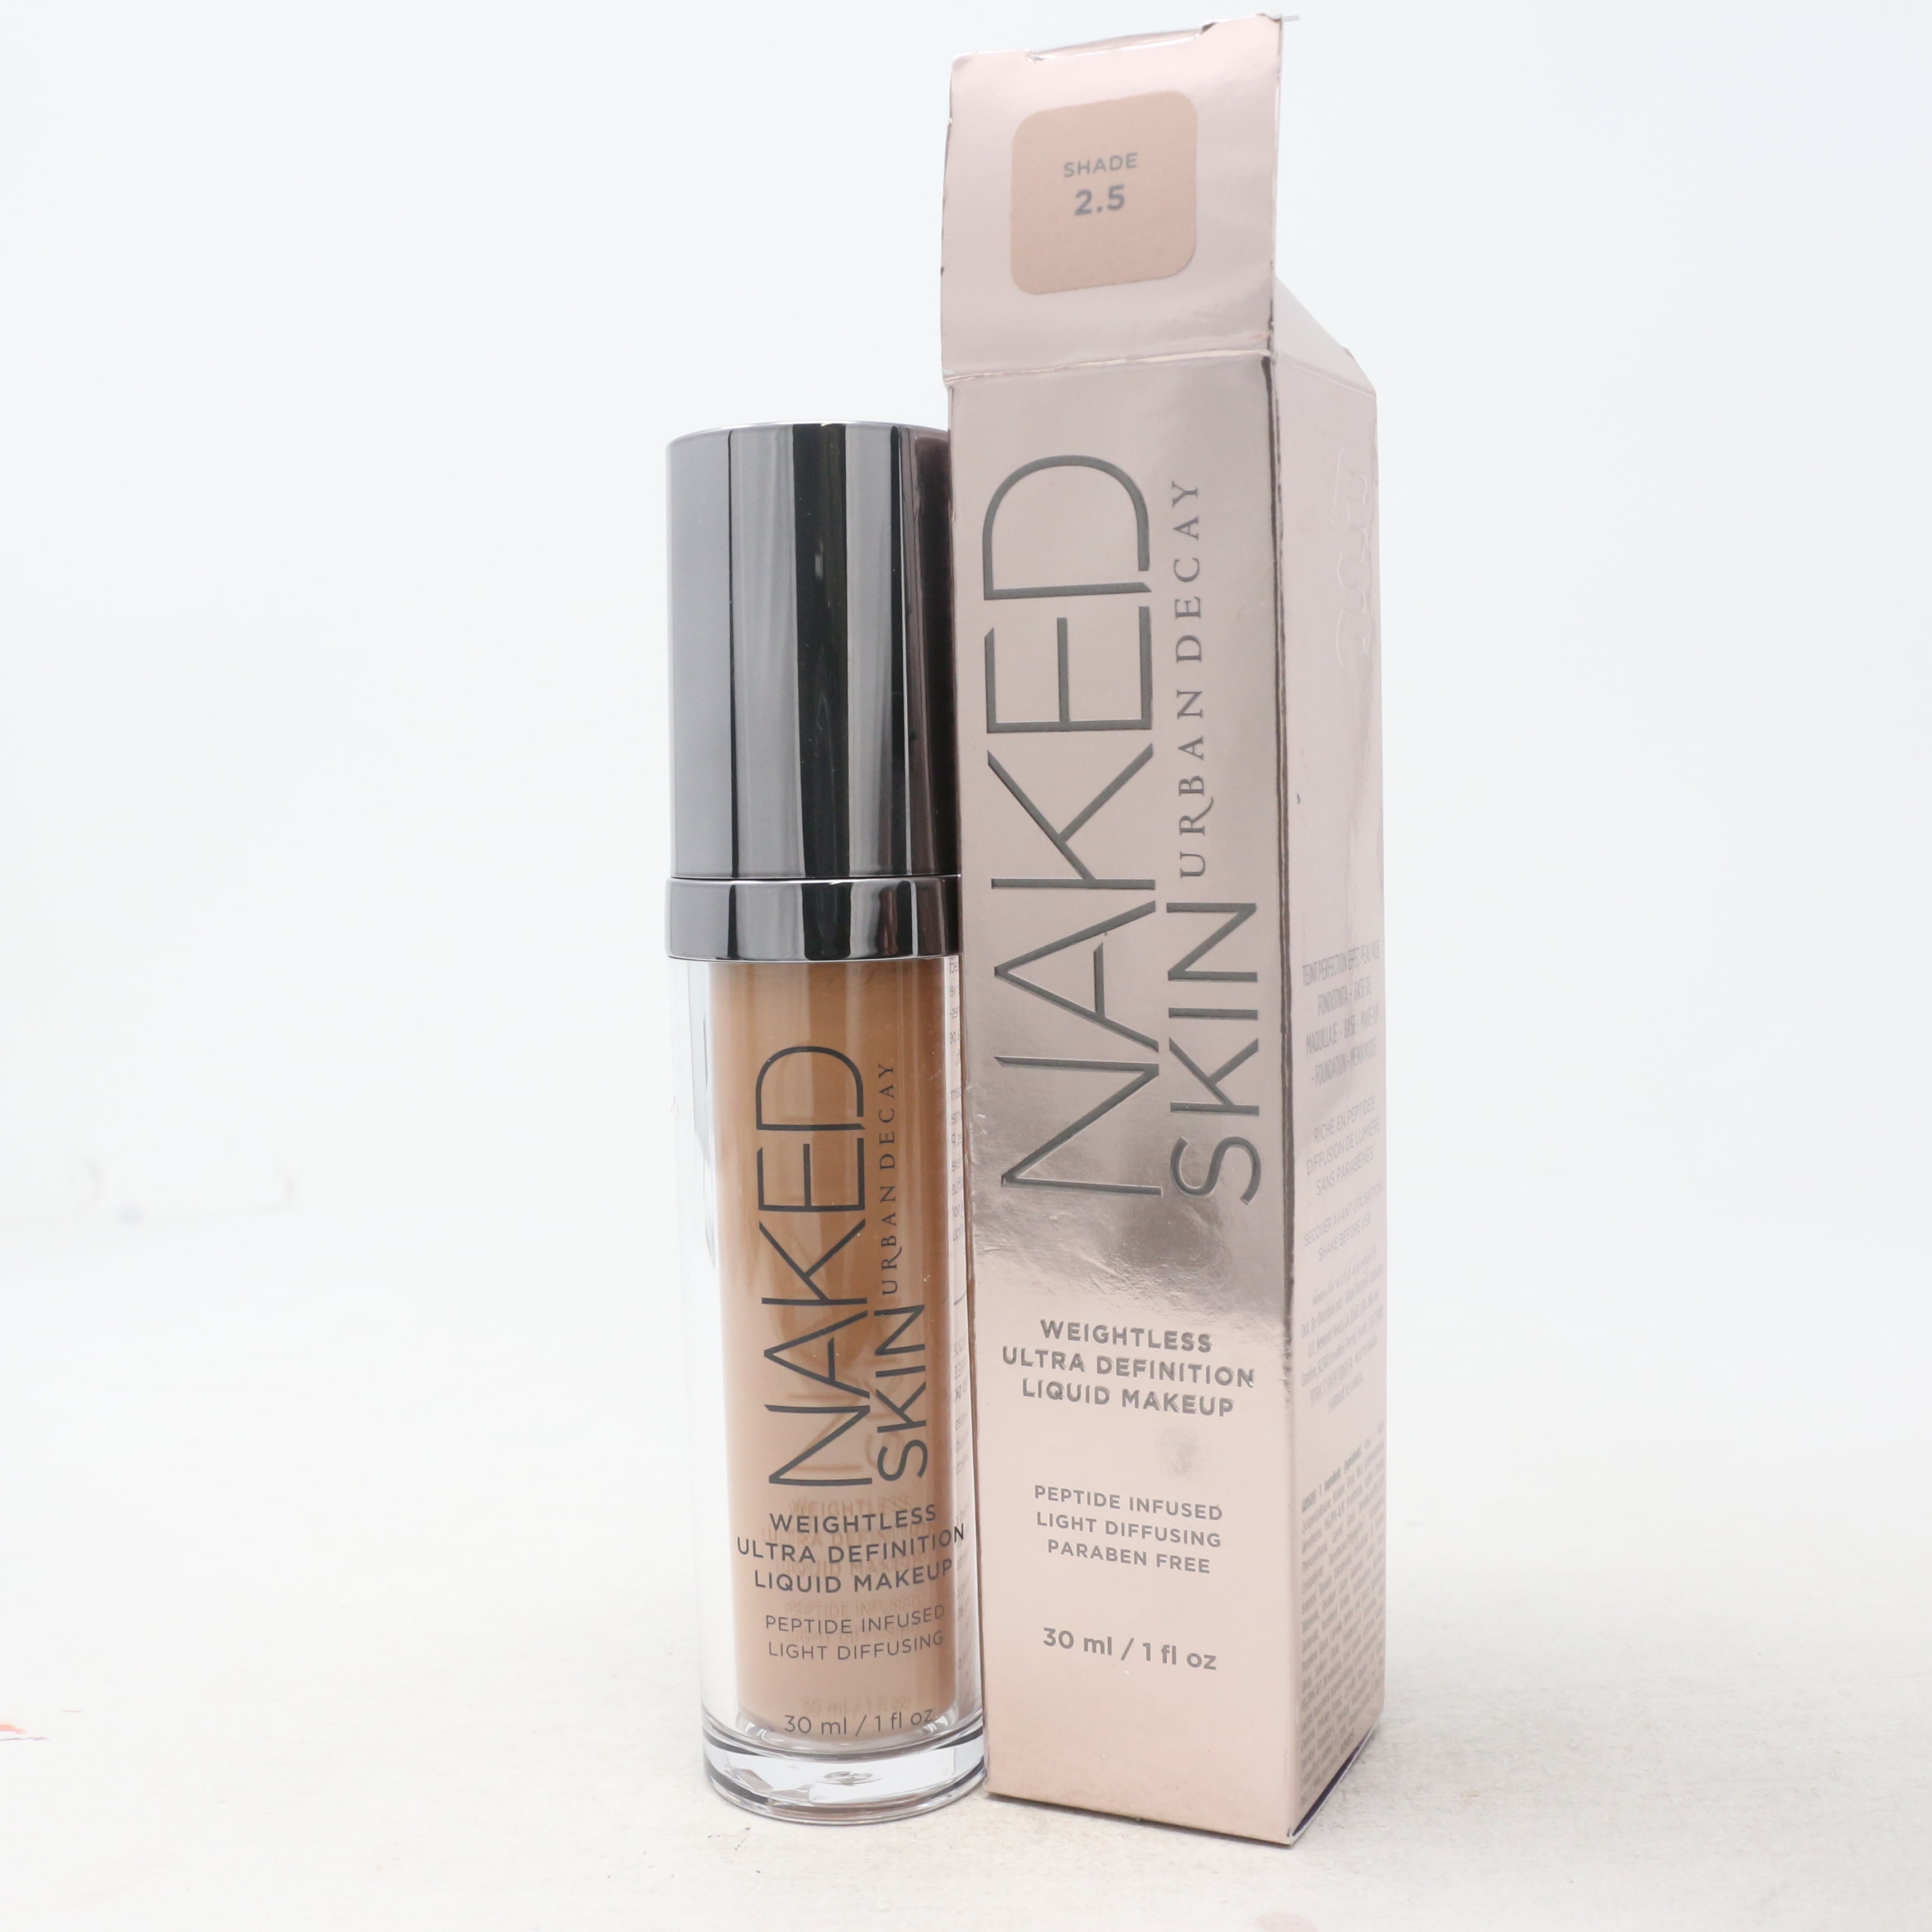 Urban Decay Naked Skin Weightless Ultra Definition Liquid Makeup New